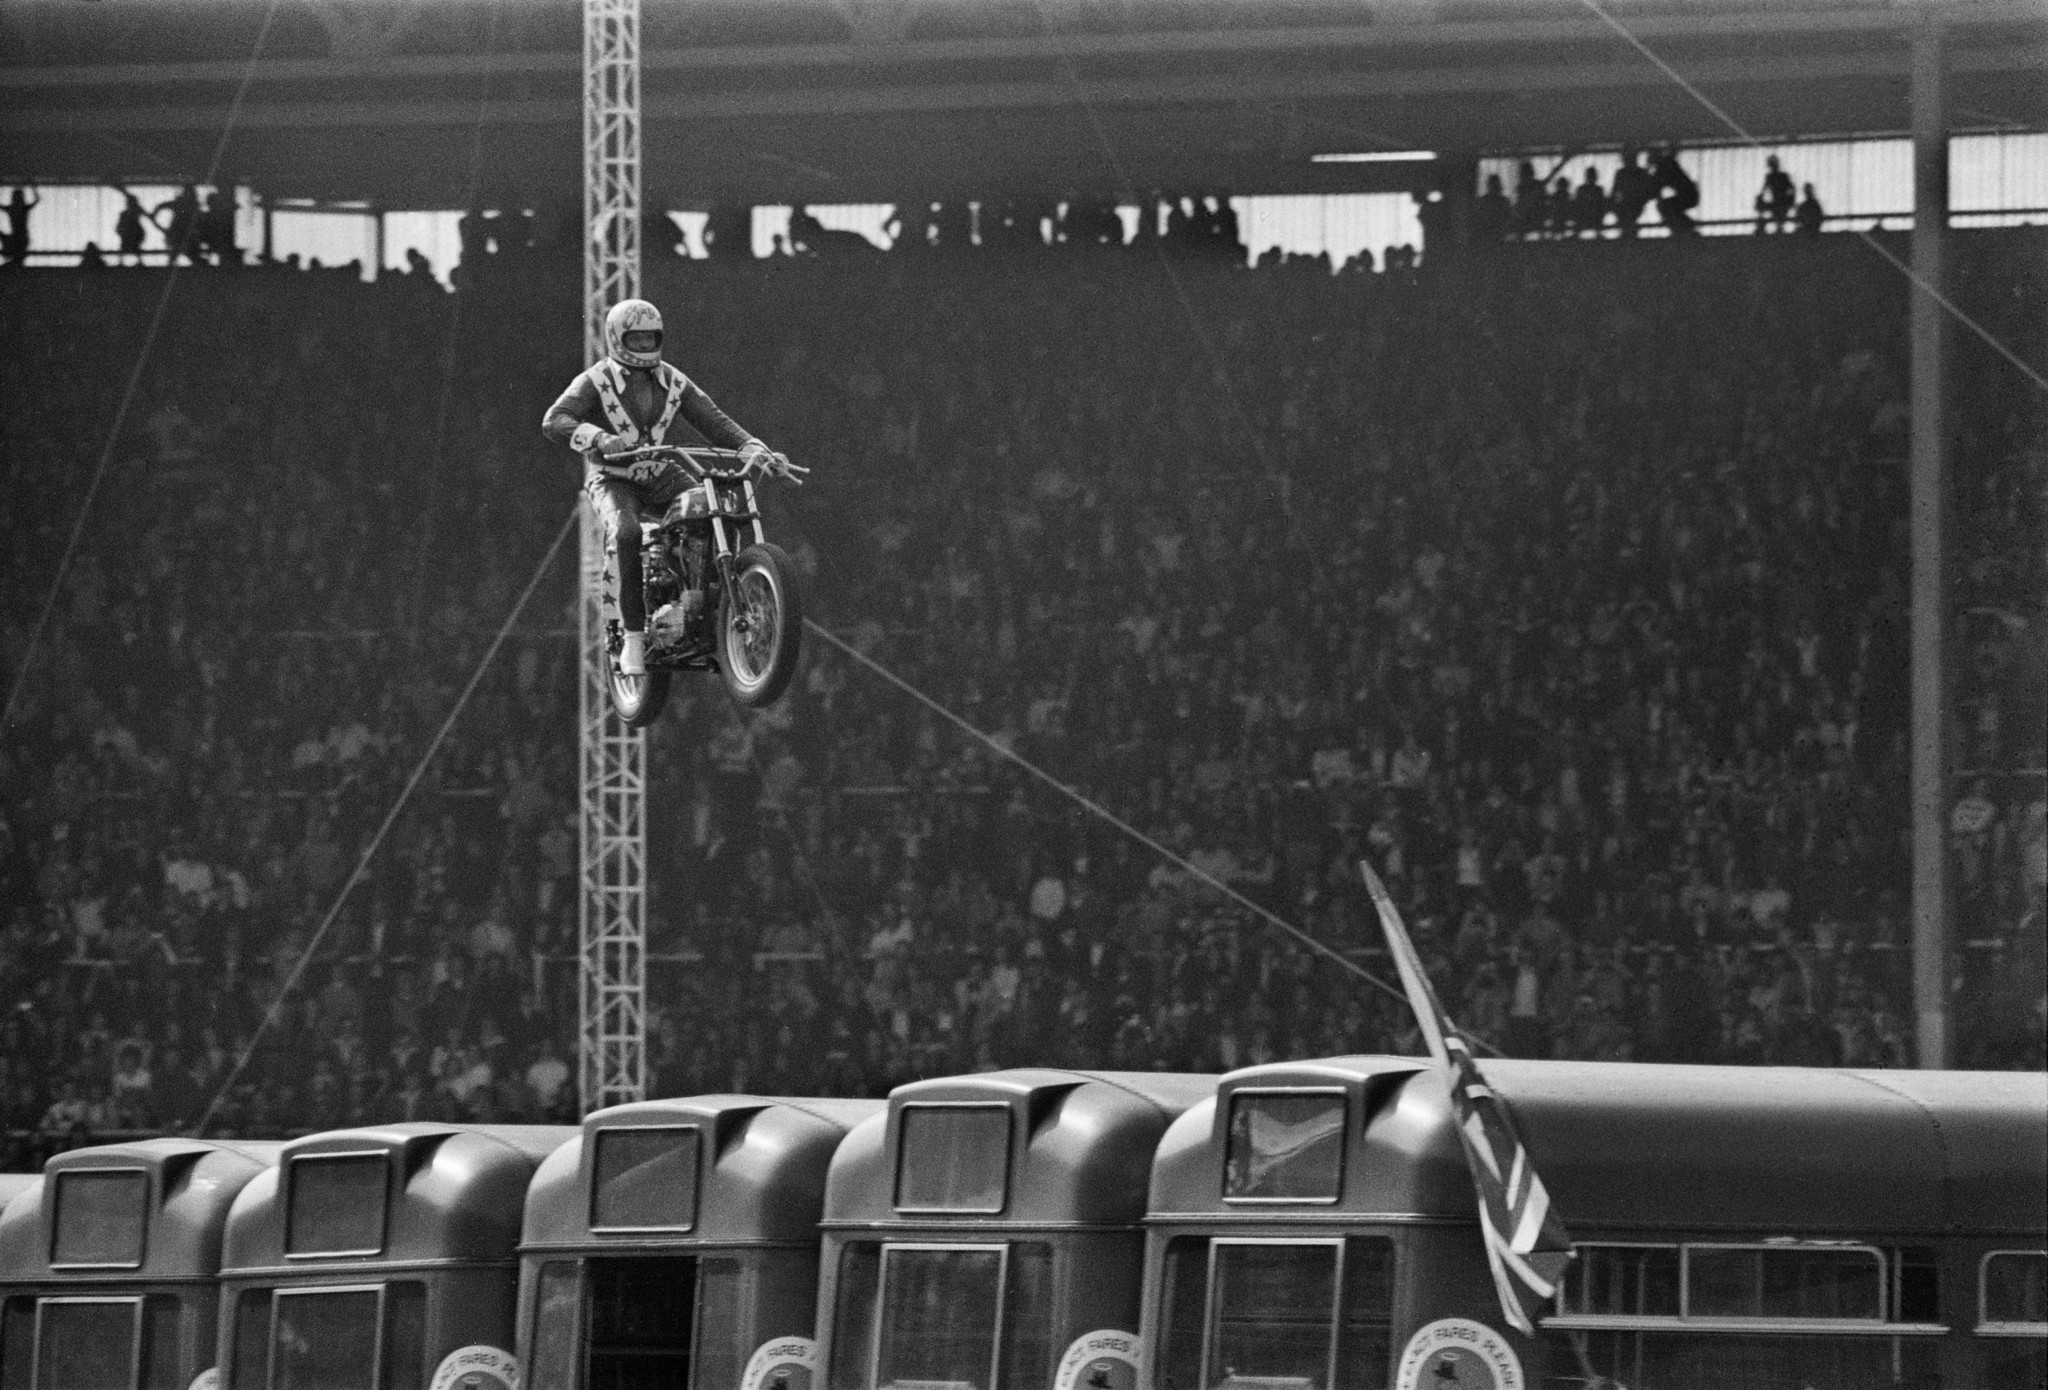 Evel Knievel crashed on landing after his attempt to clear 13 London buses at Wembley in 1975 ©Getty Images